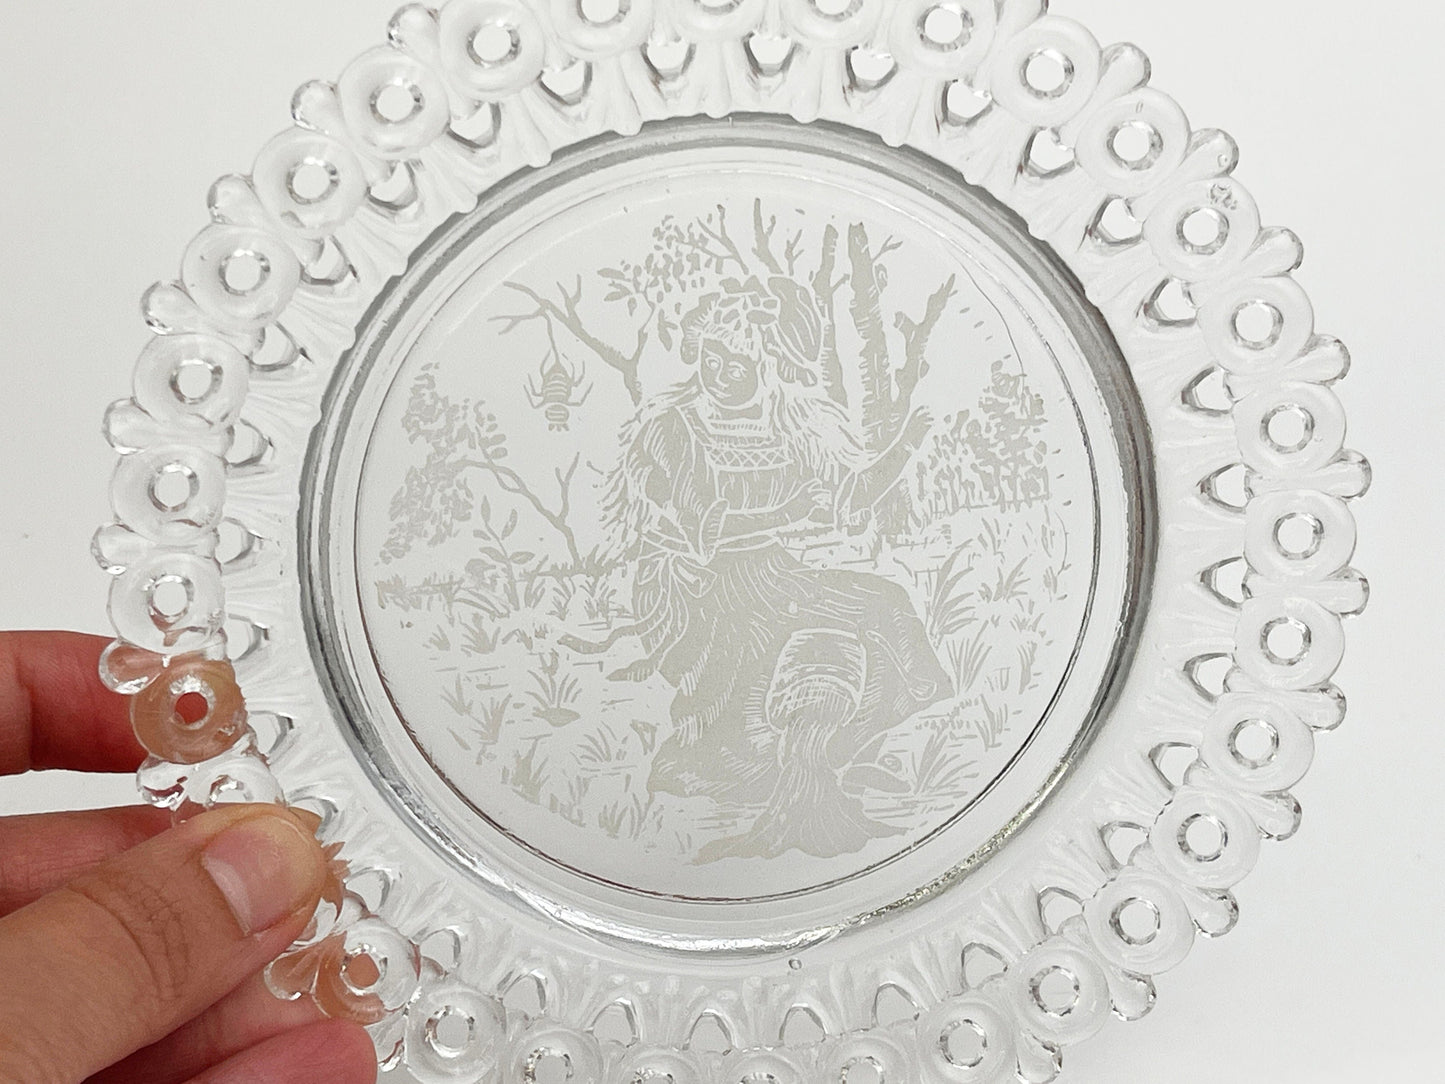 Antique Little Miss Muffet Crystal Plates | Set of two | Egg & Dart | 1800's Cottagecore Vintage Decor | Whimsical